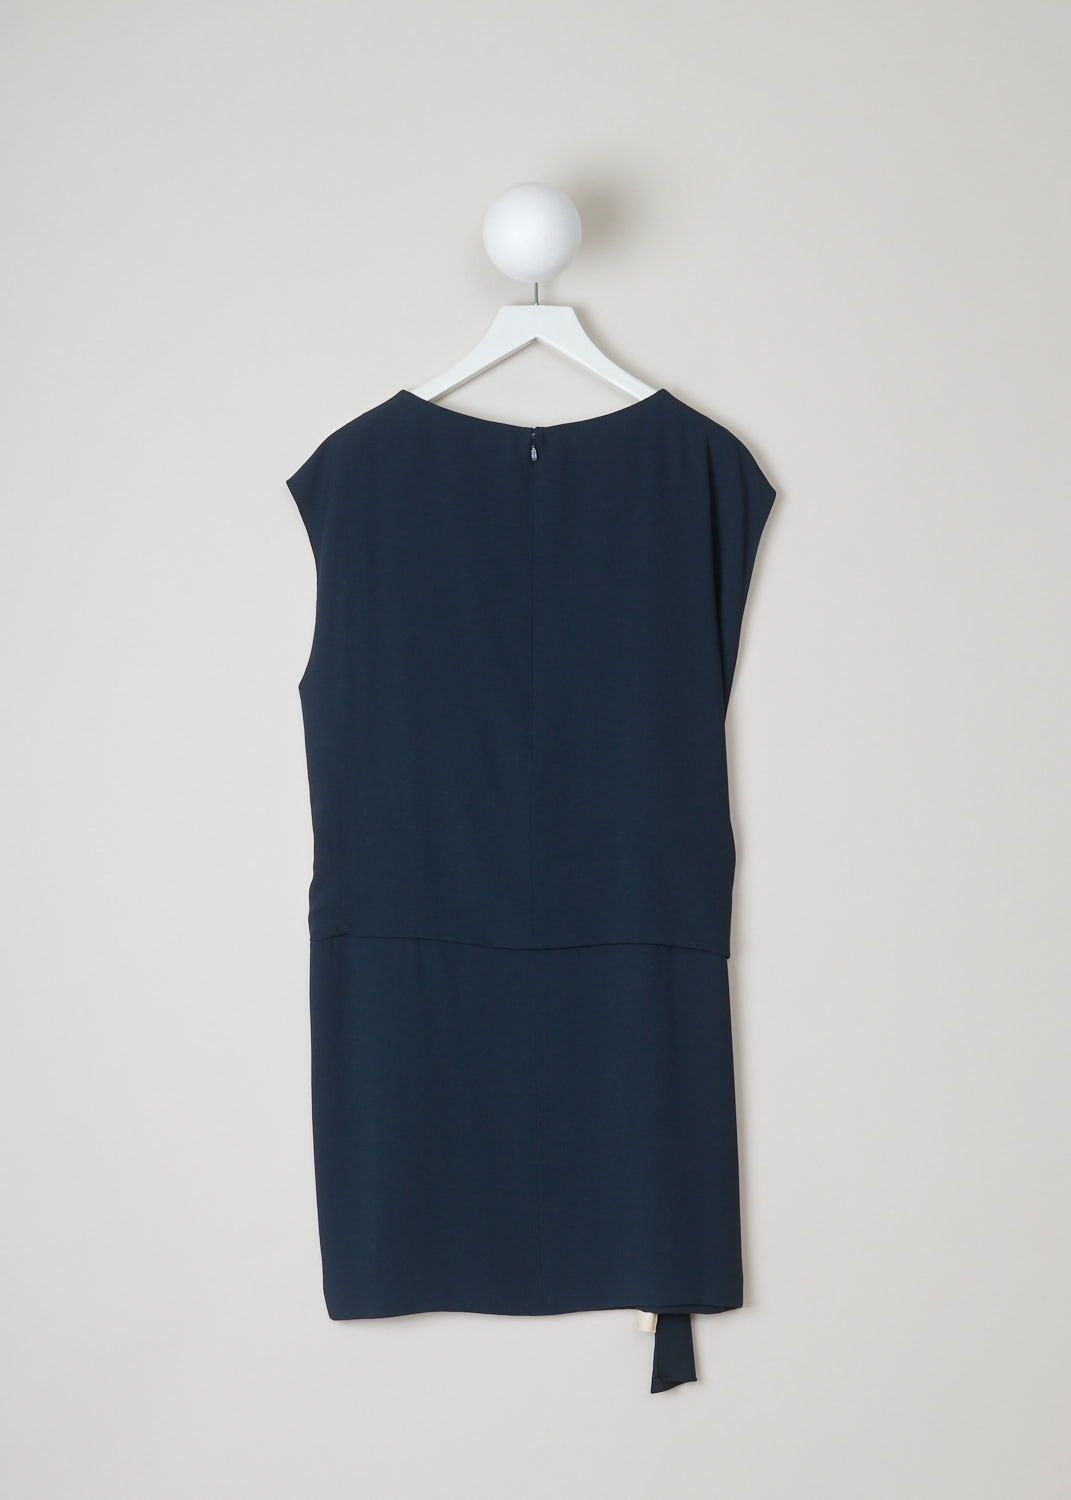 Chloé, Dropped waist dress in beige and blue, 15SRO18_15S238_1Z7_black_navy_vanilla, blue beige, back. Dropped waist dress, sharing some similarities with a wrap dress. The blue and beige wrap ribbon can be tied into various knots. Furthermore, this sleeveless model has a round neckline and a concealed zipper with a metal clip on the back. 